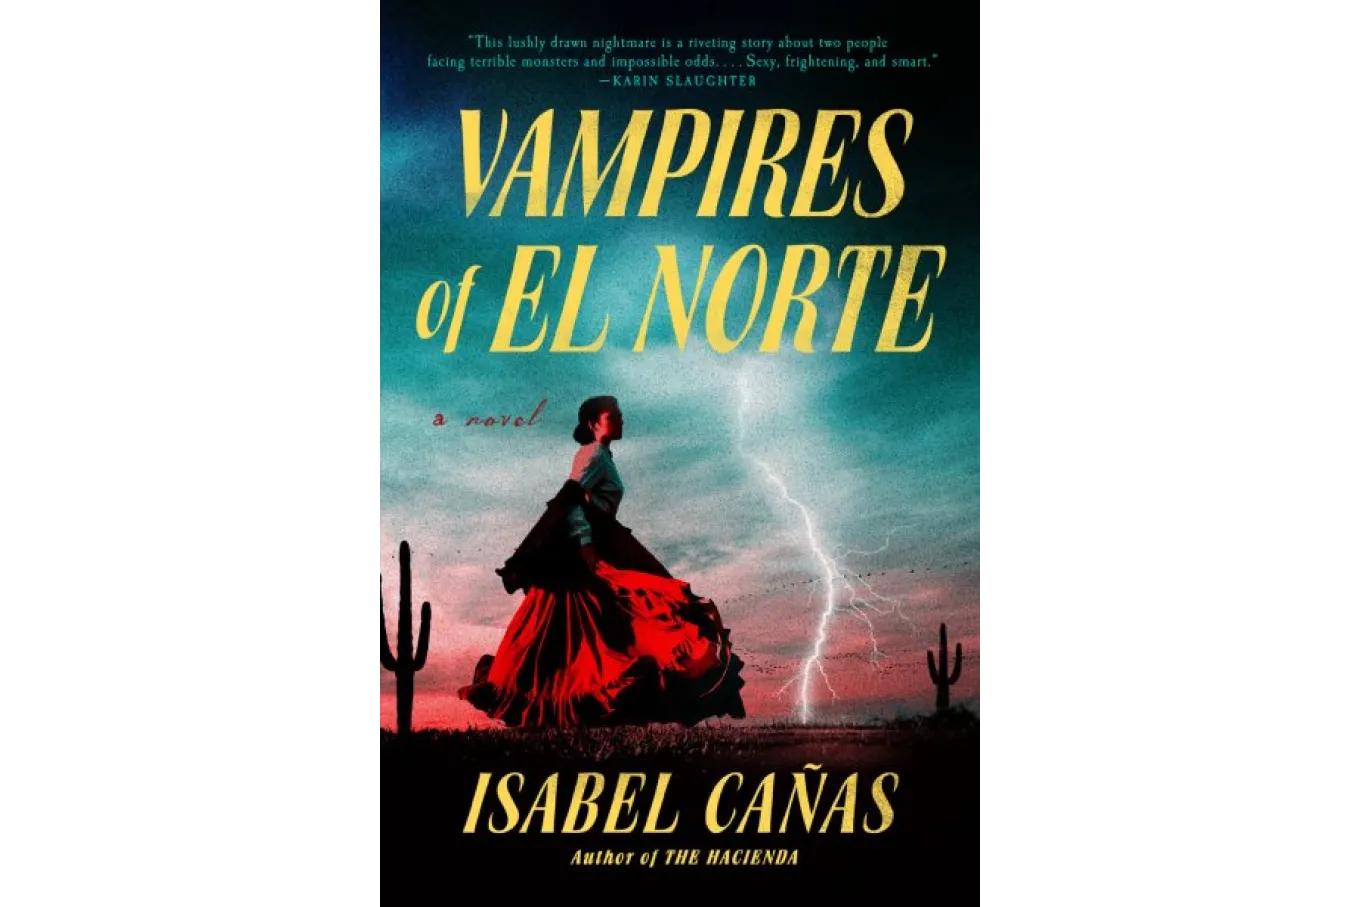 Cover image - a young woman in an early 19th century red dress strides across desert ground against a stormy sky of pinks and greens.  There are saguaro cacti and a sky-to-ground lightning strike in the background.